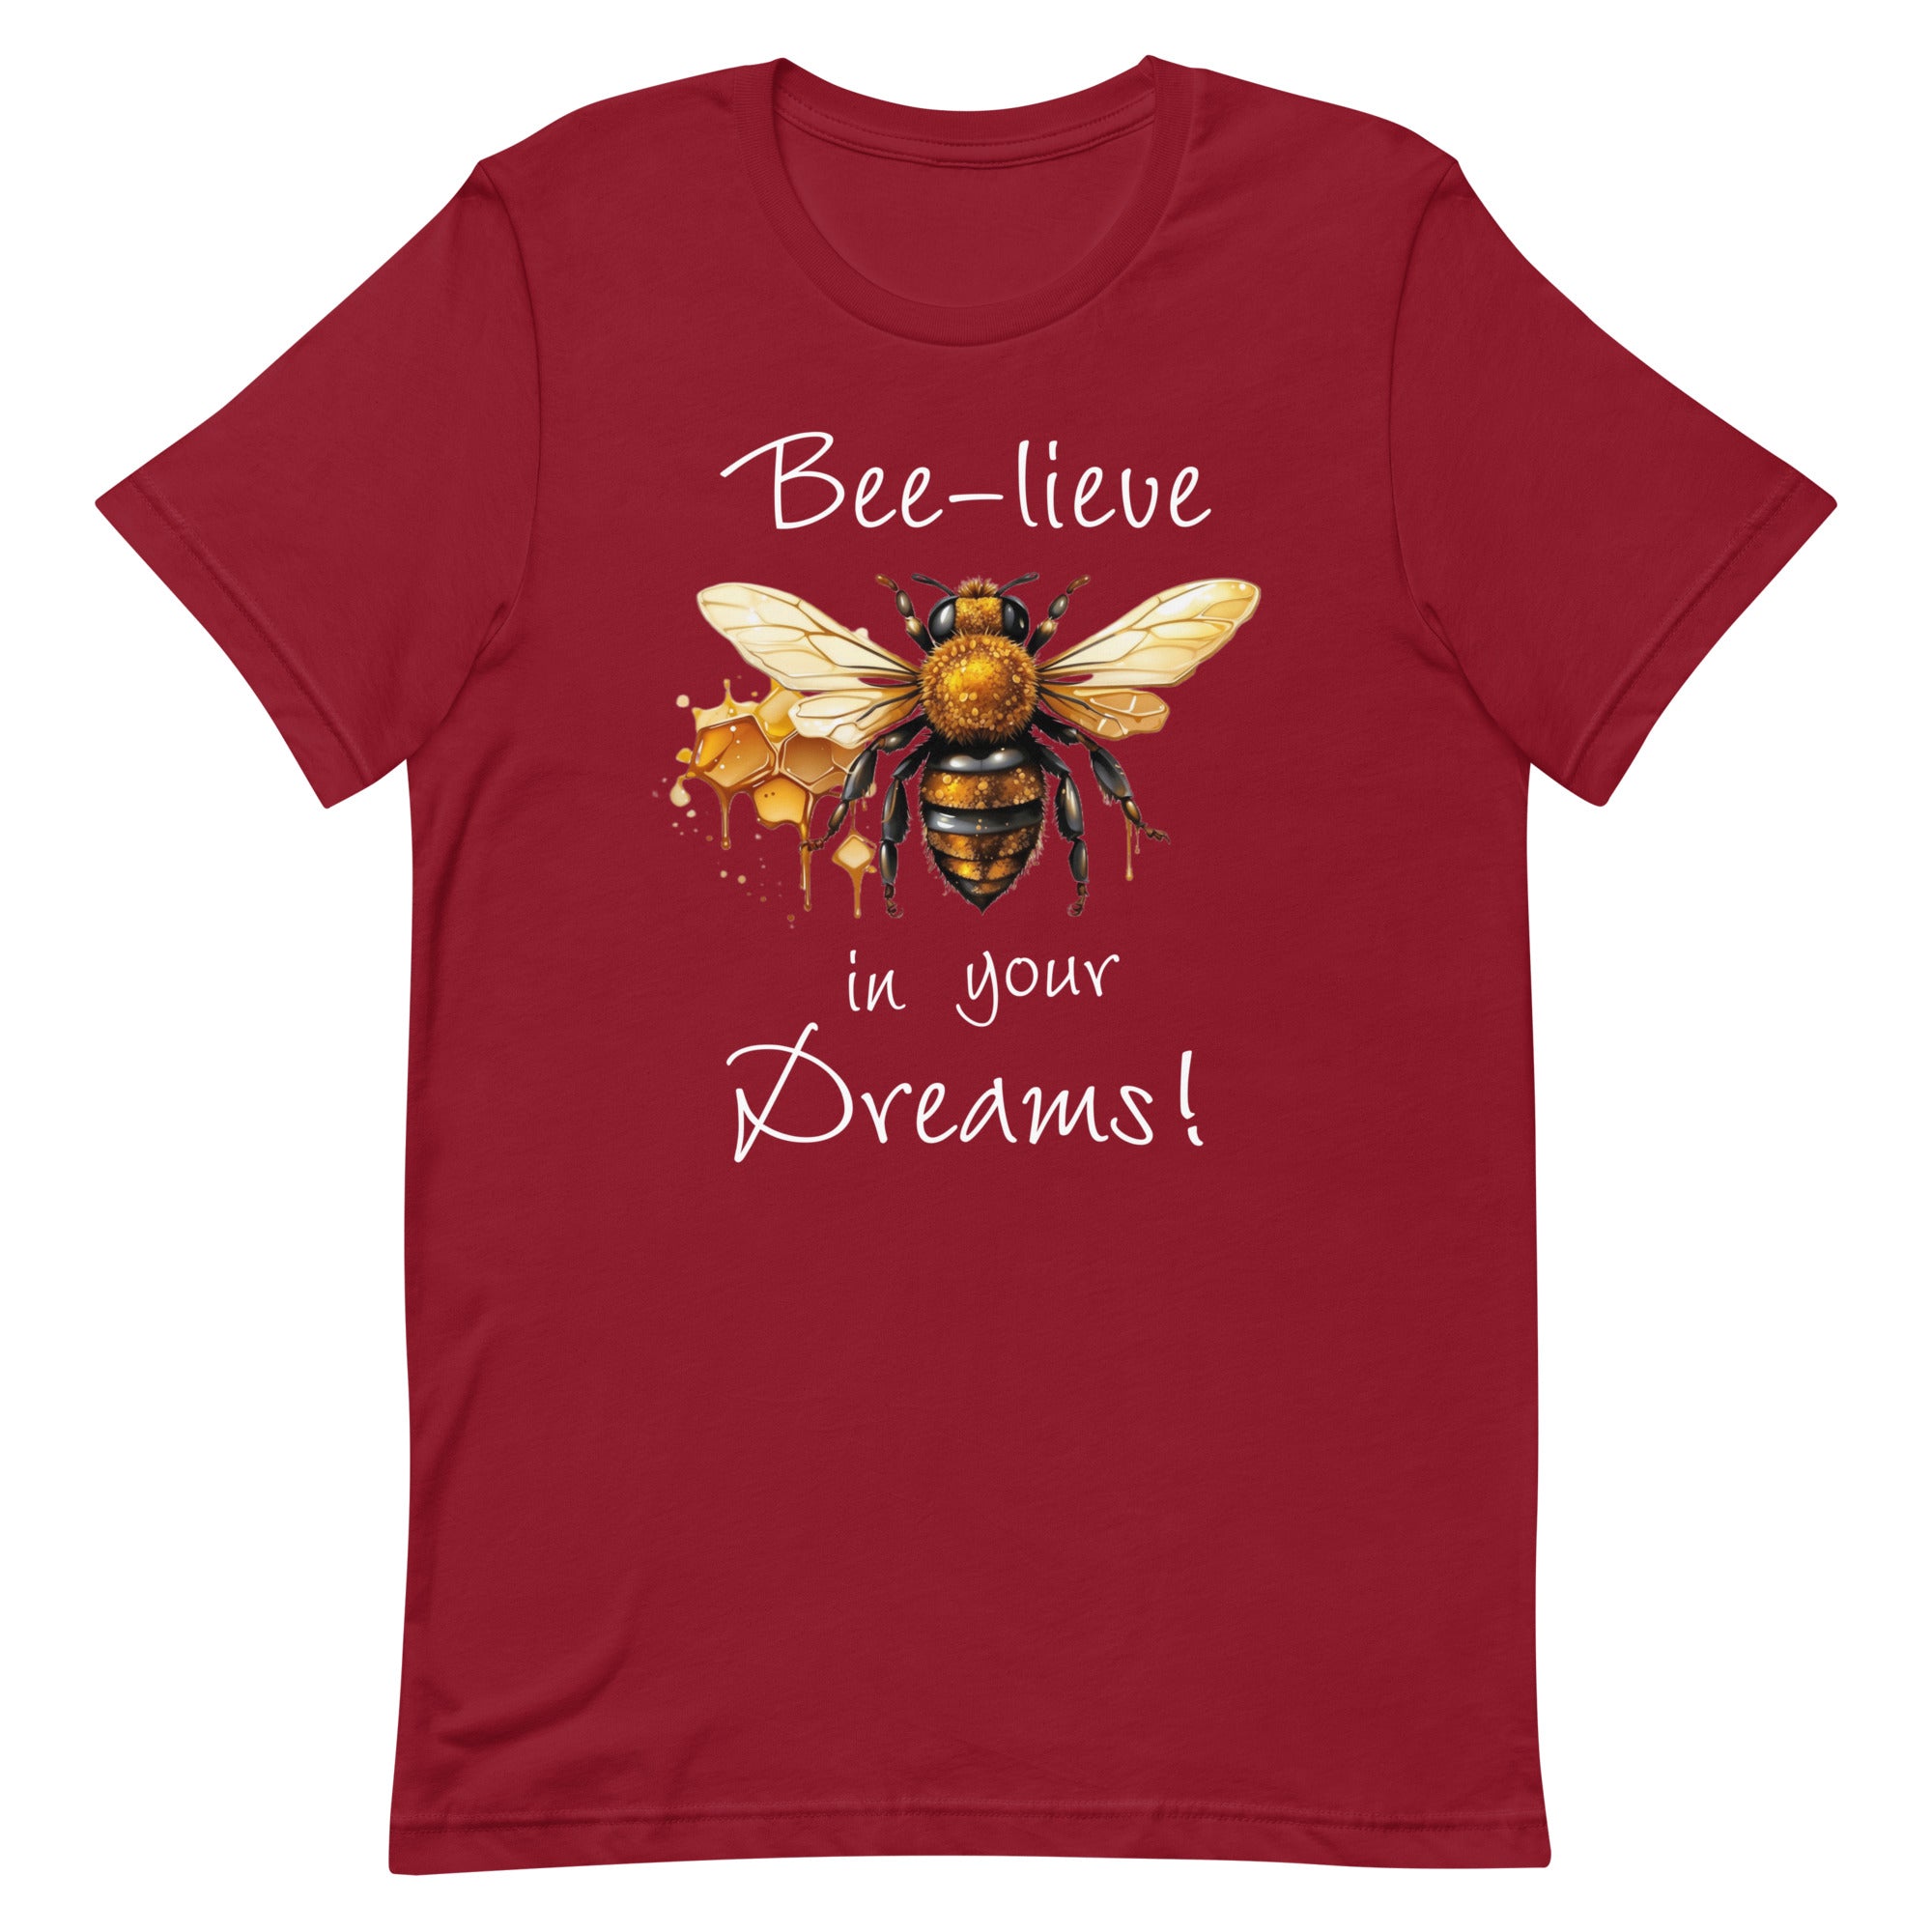 Bee-lieve in Your Dreams T-Shirt, Gift for Bee Lovers Cardinal L M XL S DenBox